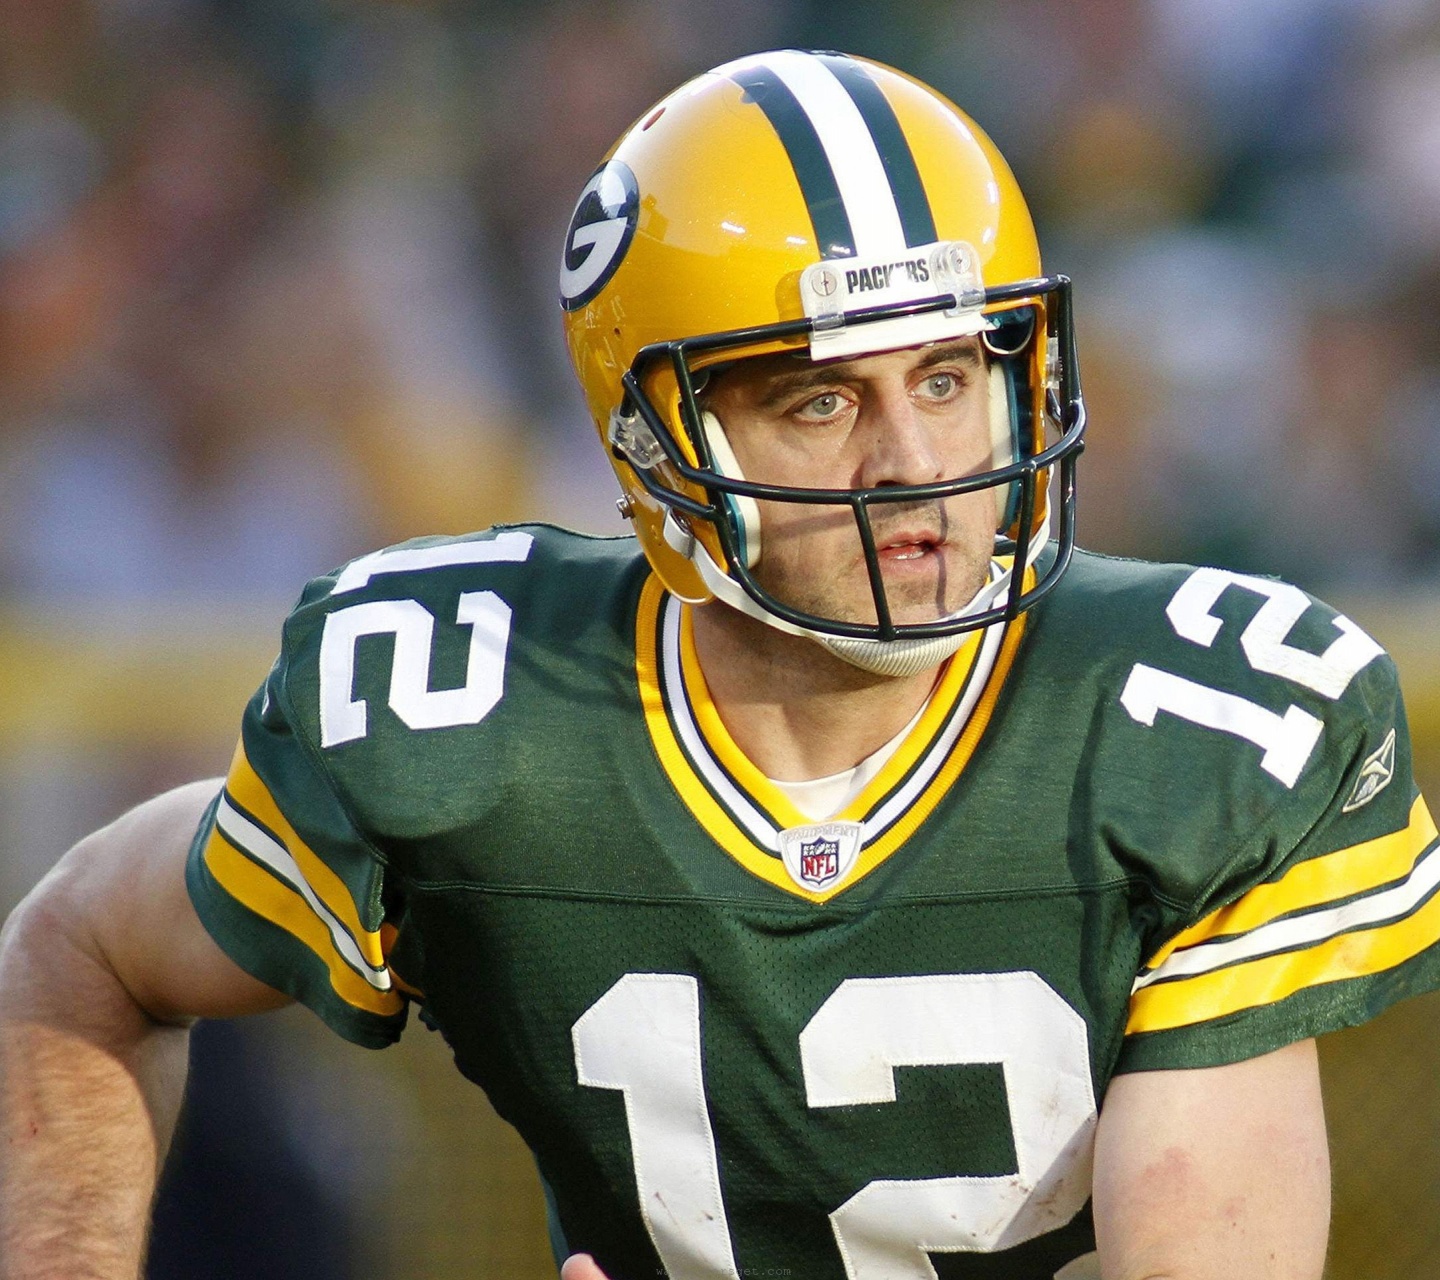 Green Bay Packers American Football Quarterback Aaron Rodgers